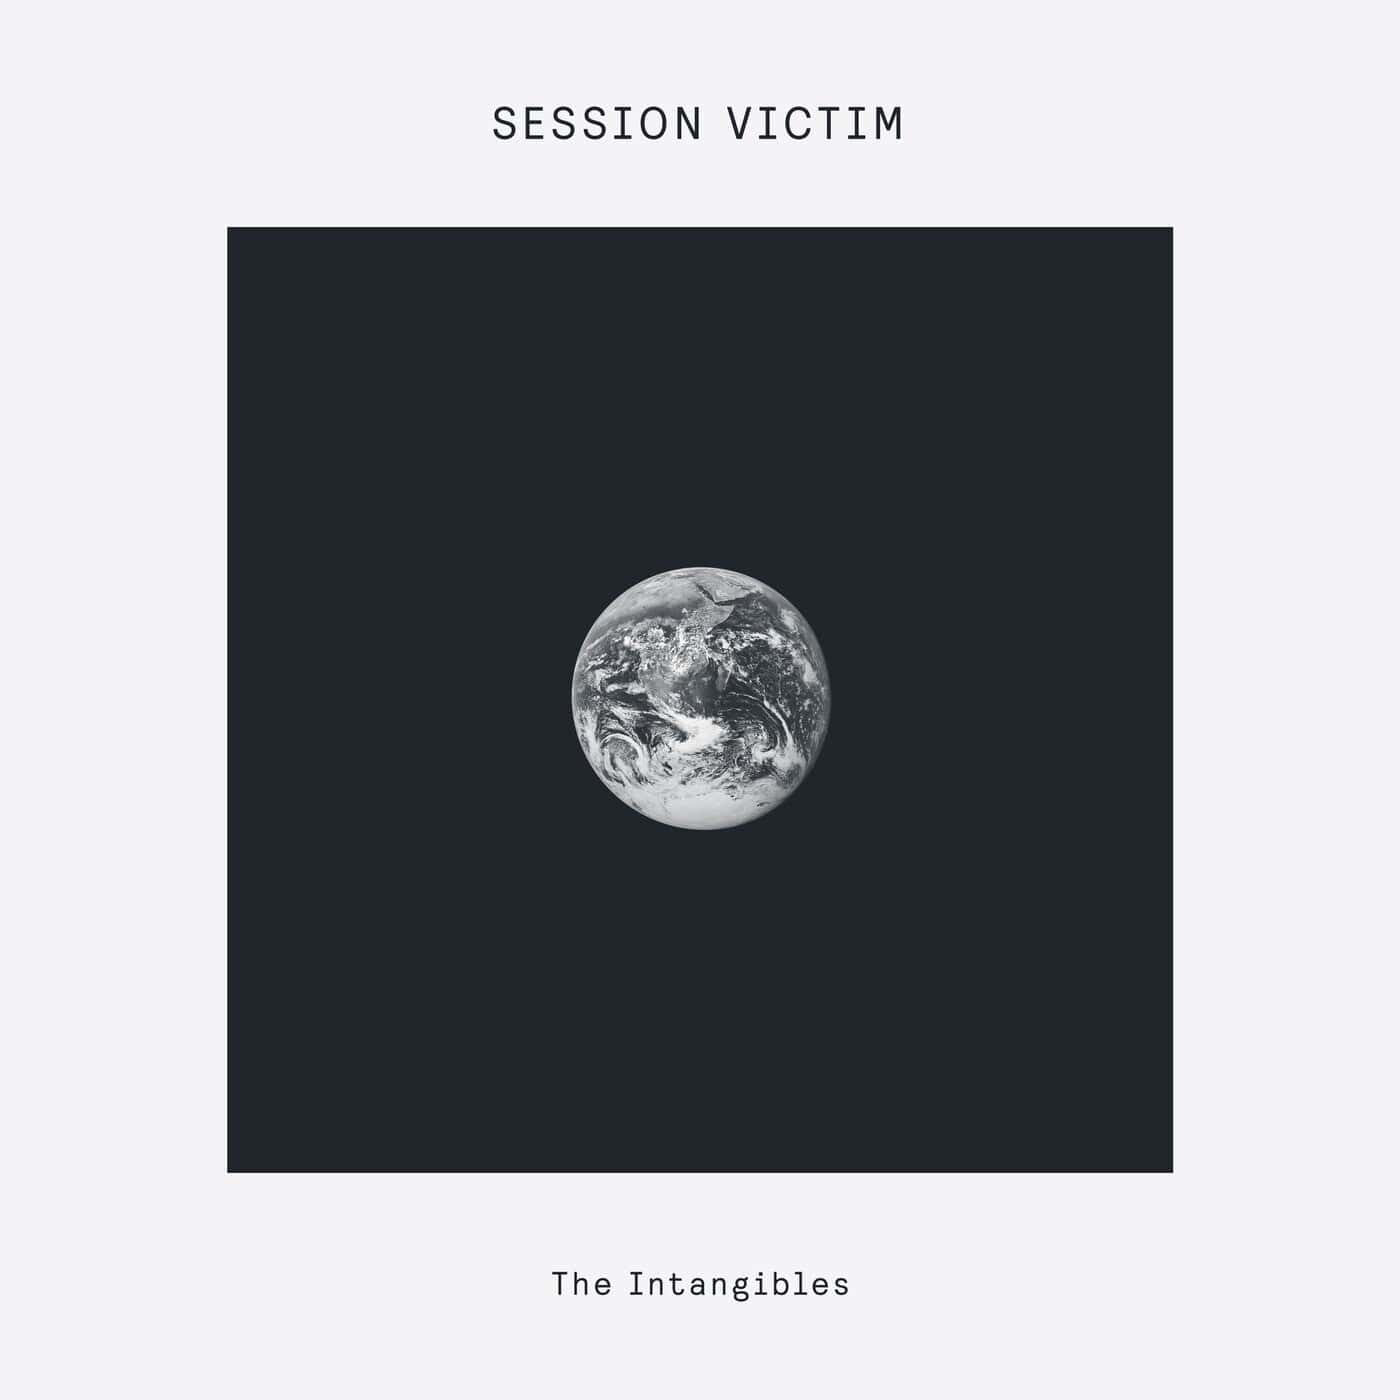 Download Session Victim, Ras Stimulant - The Intangibles on Electrobuzz